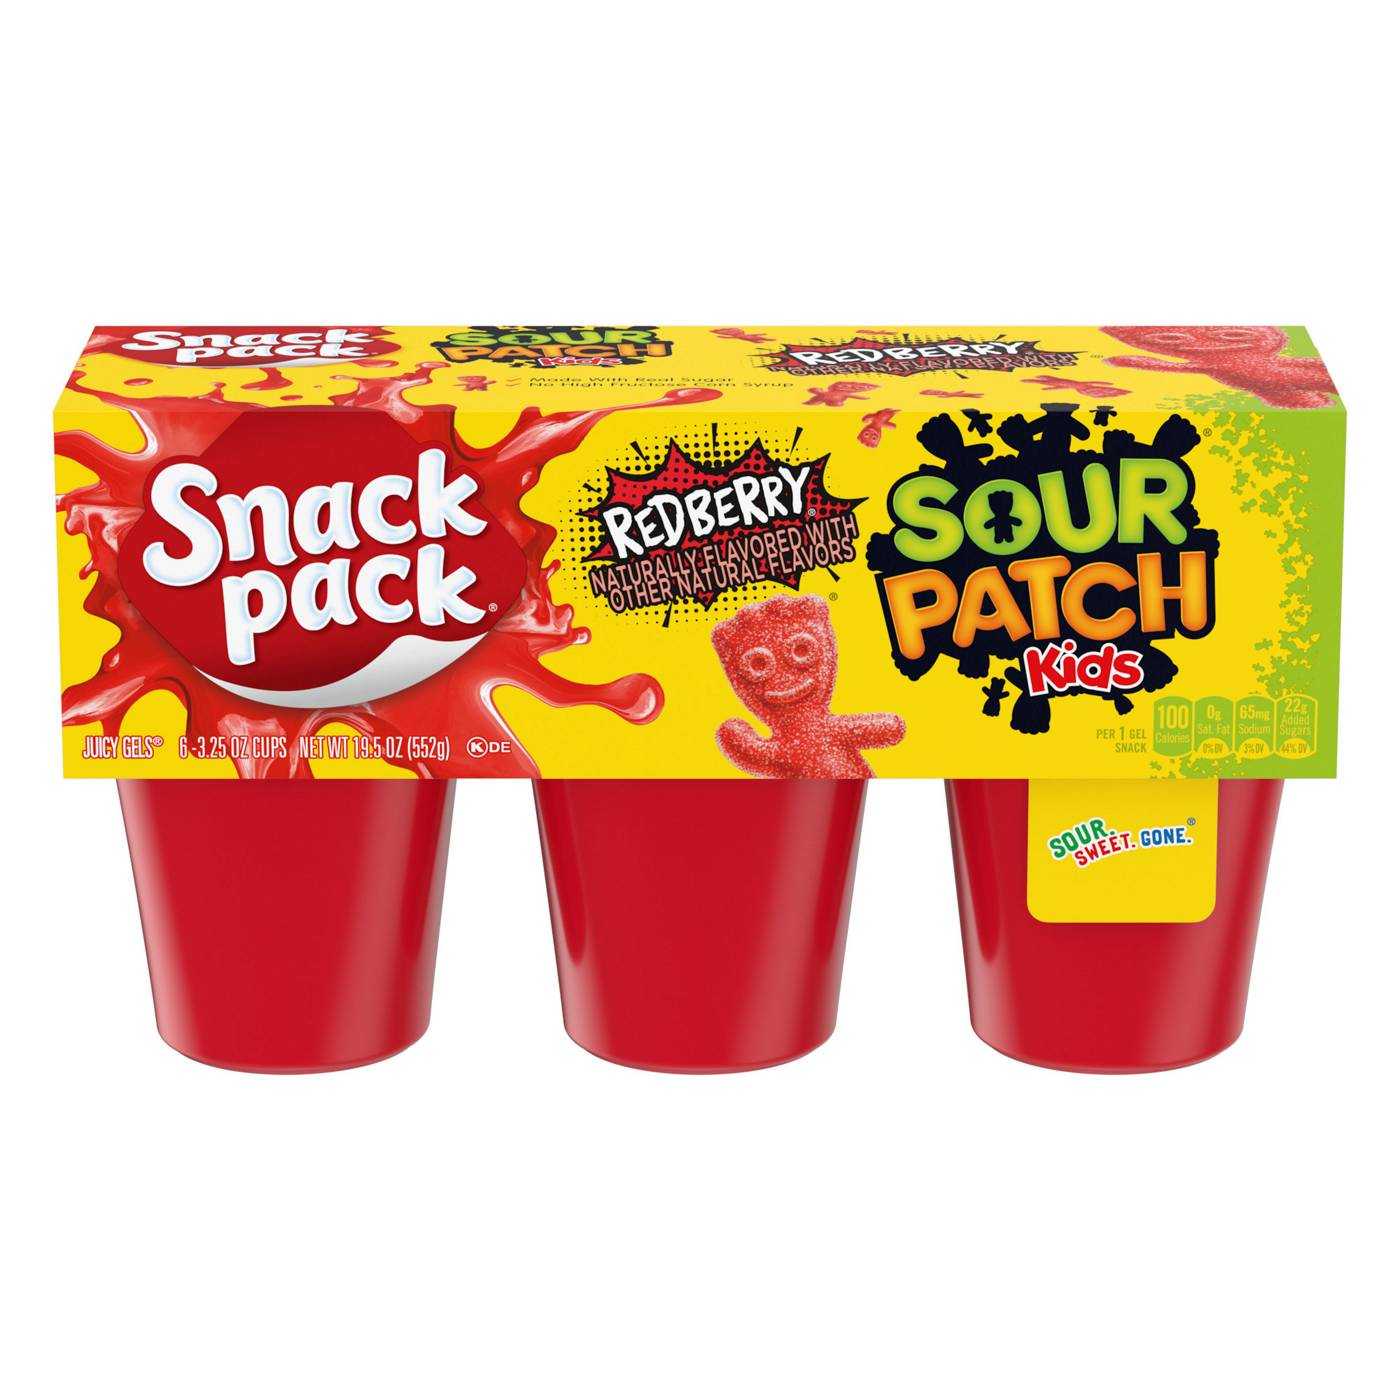 Snack Pack Sour Patch Kids Redberry Juicy Gels Cups; image 1 of 4